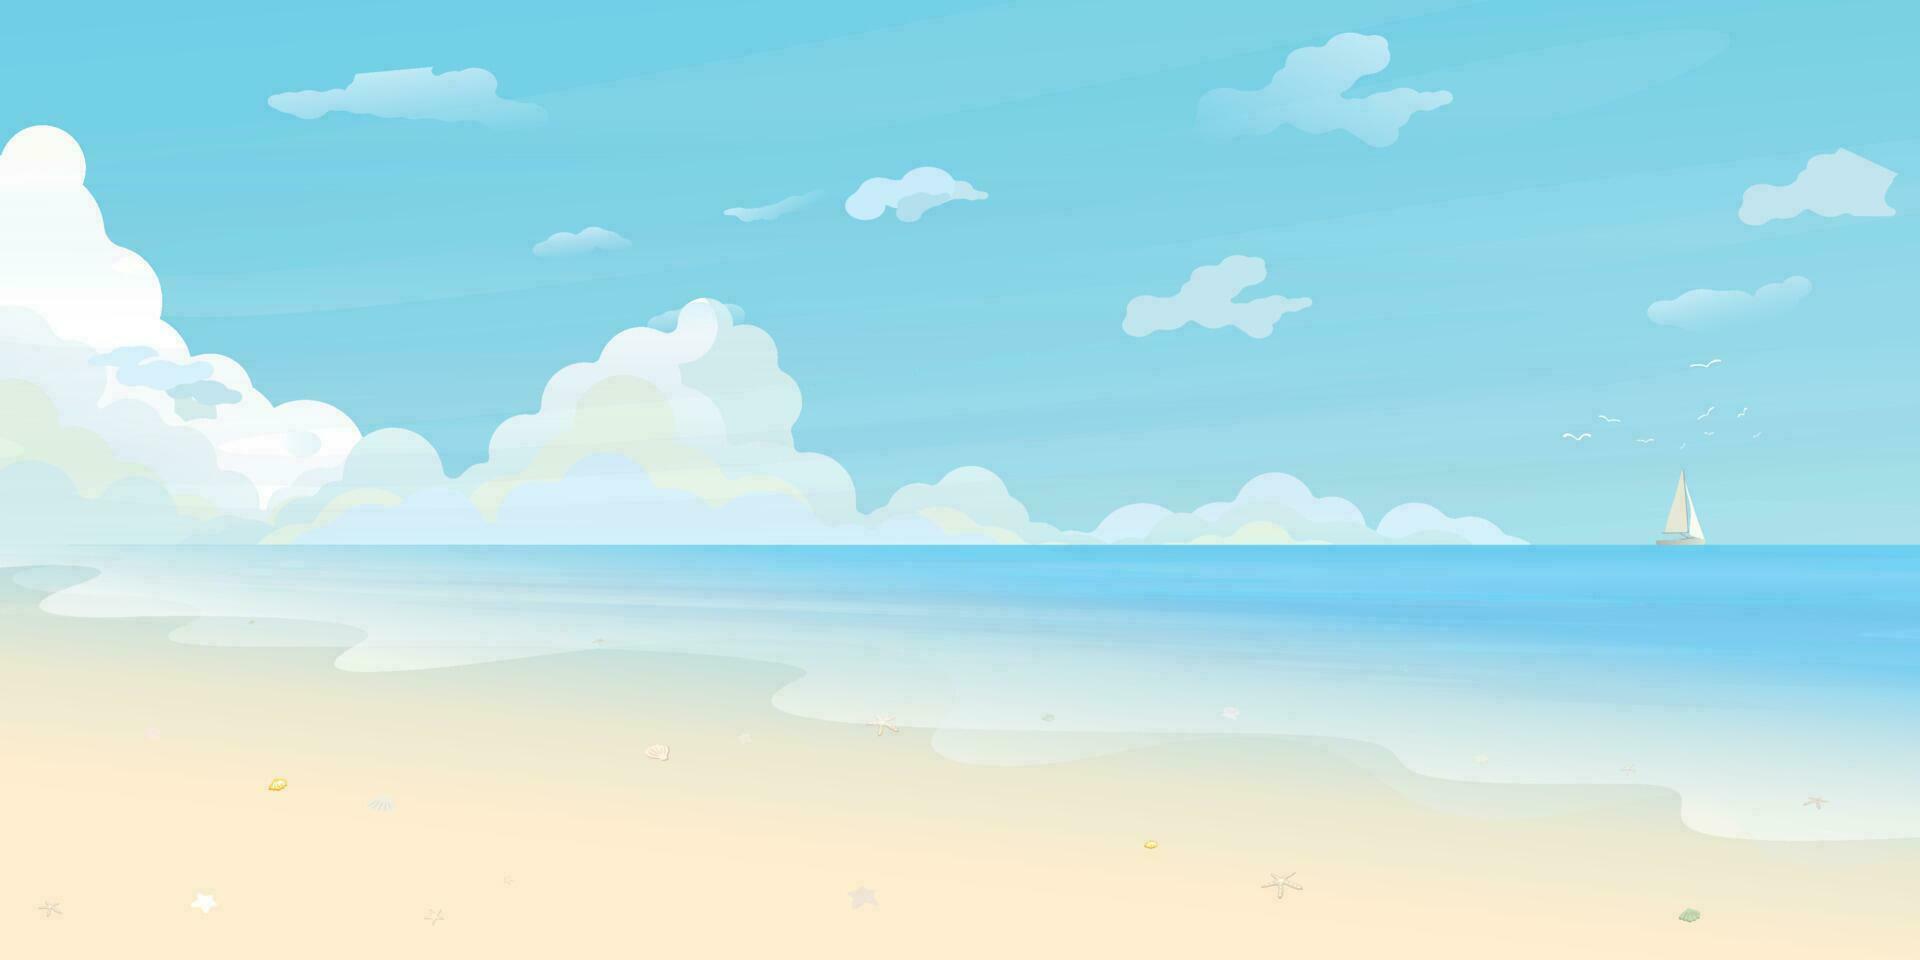 Tropical landscape of coast beautiful blue sea shore beach with yacht at skyline vector illustration.